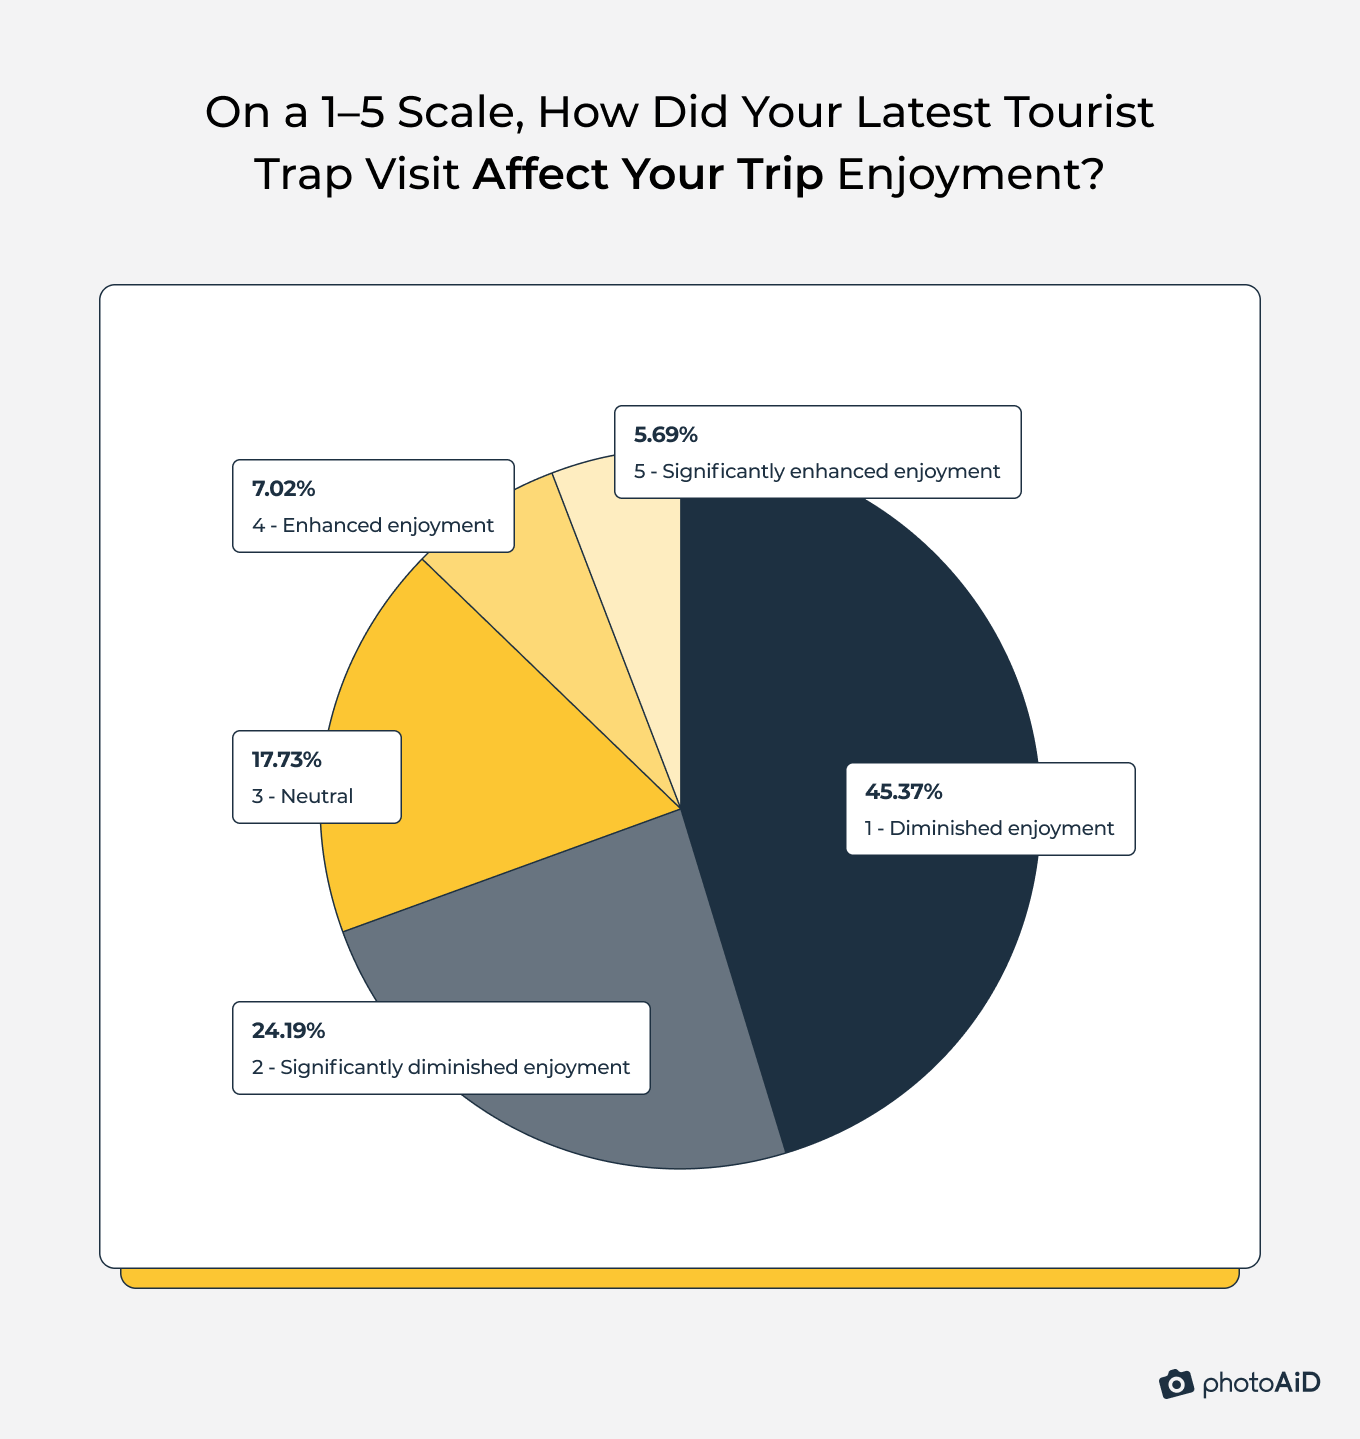 Most travelers felt their recent visit to a tourist trap diminished their trip enjoyment